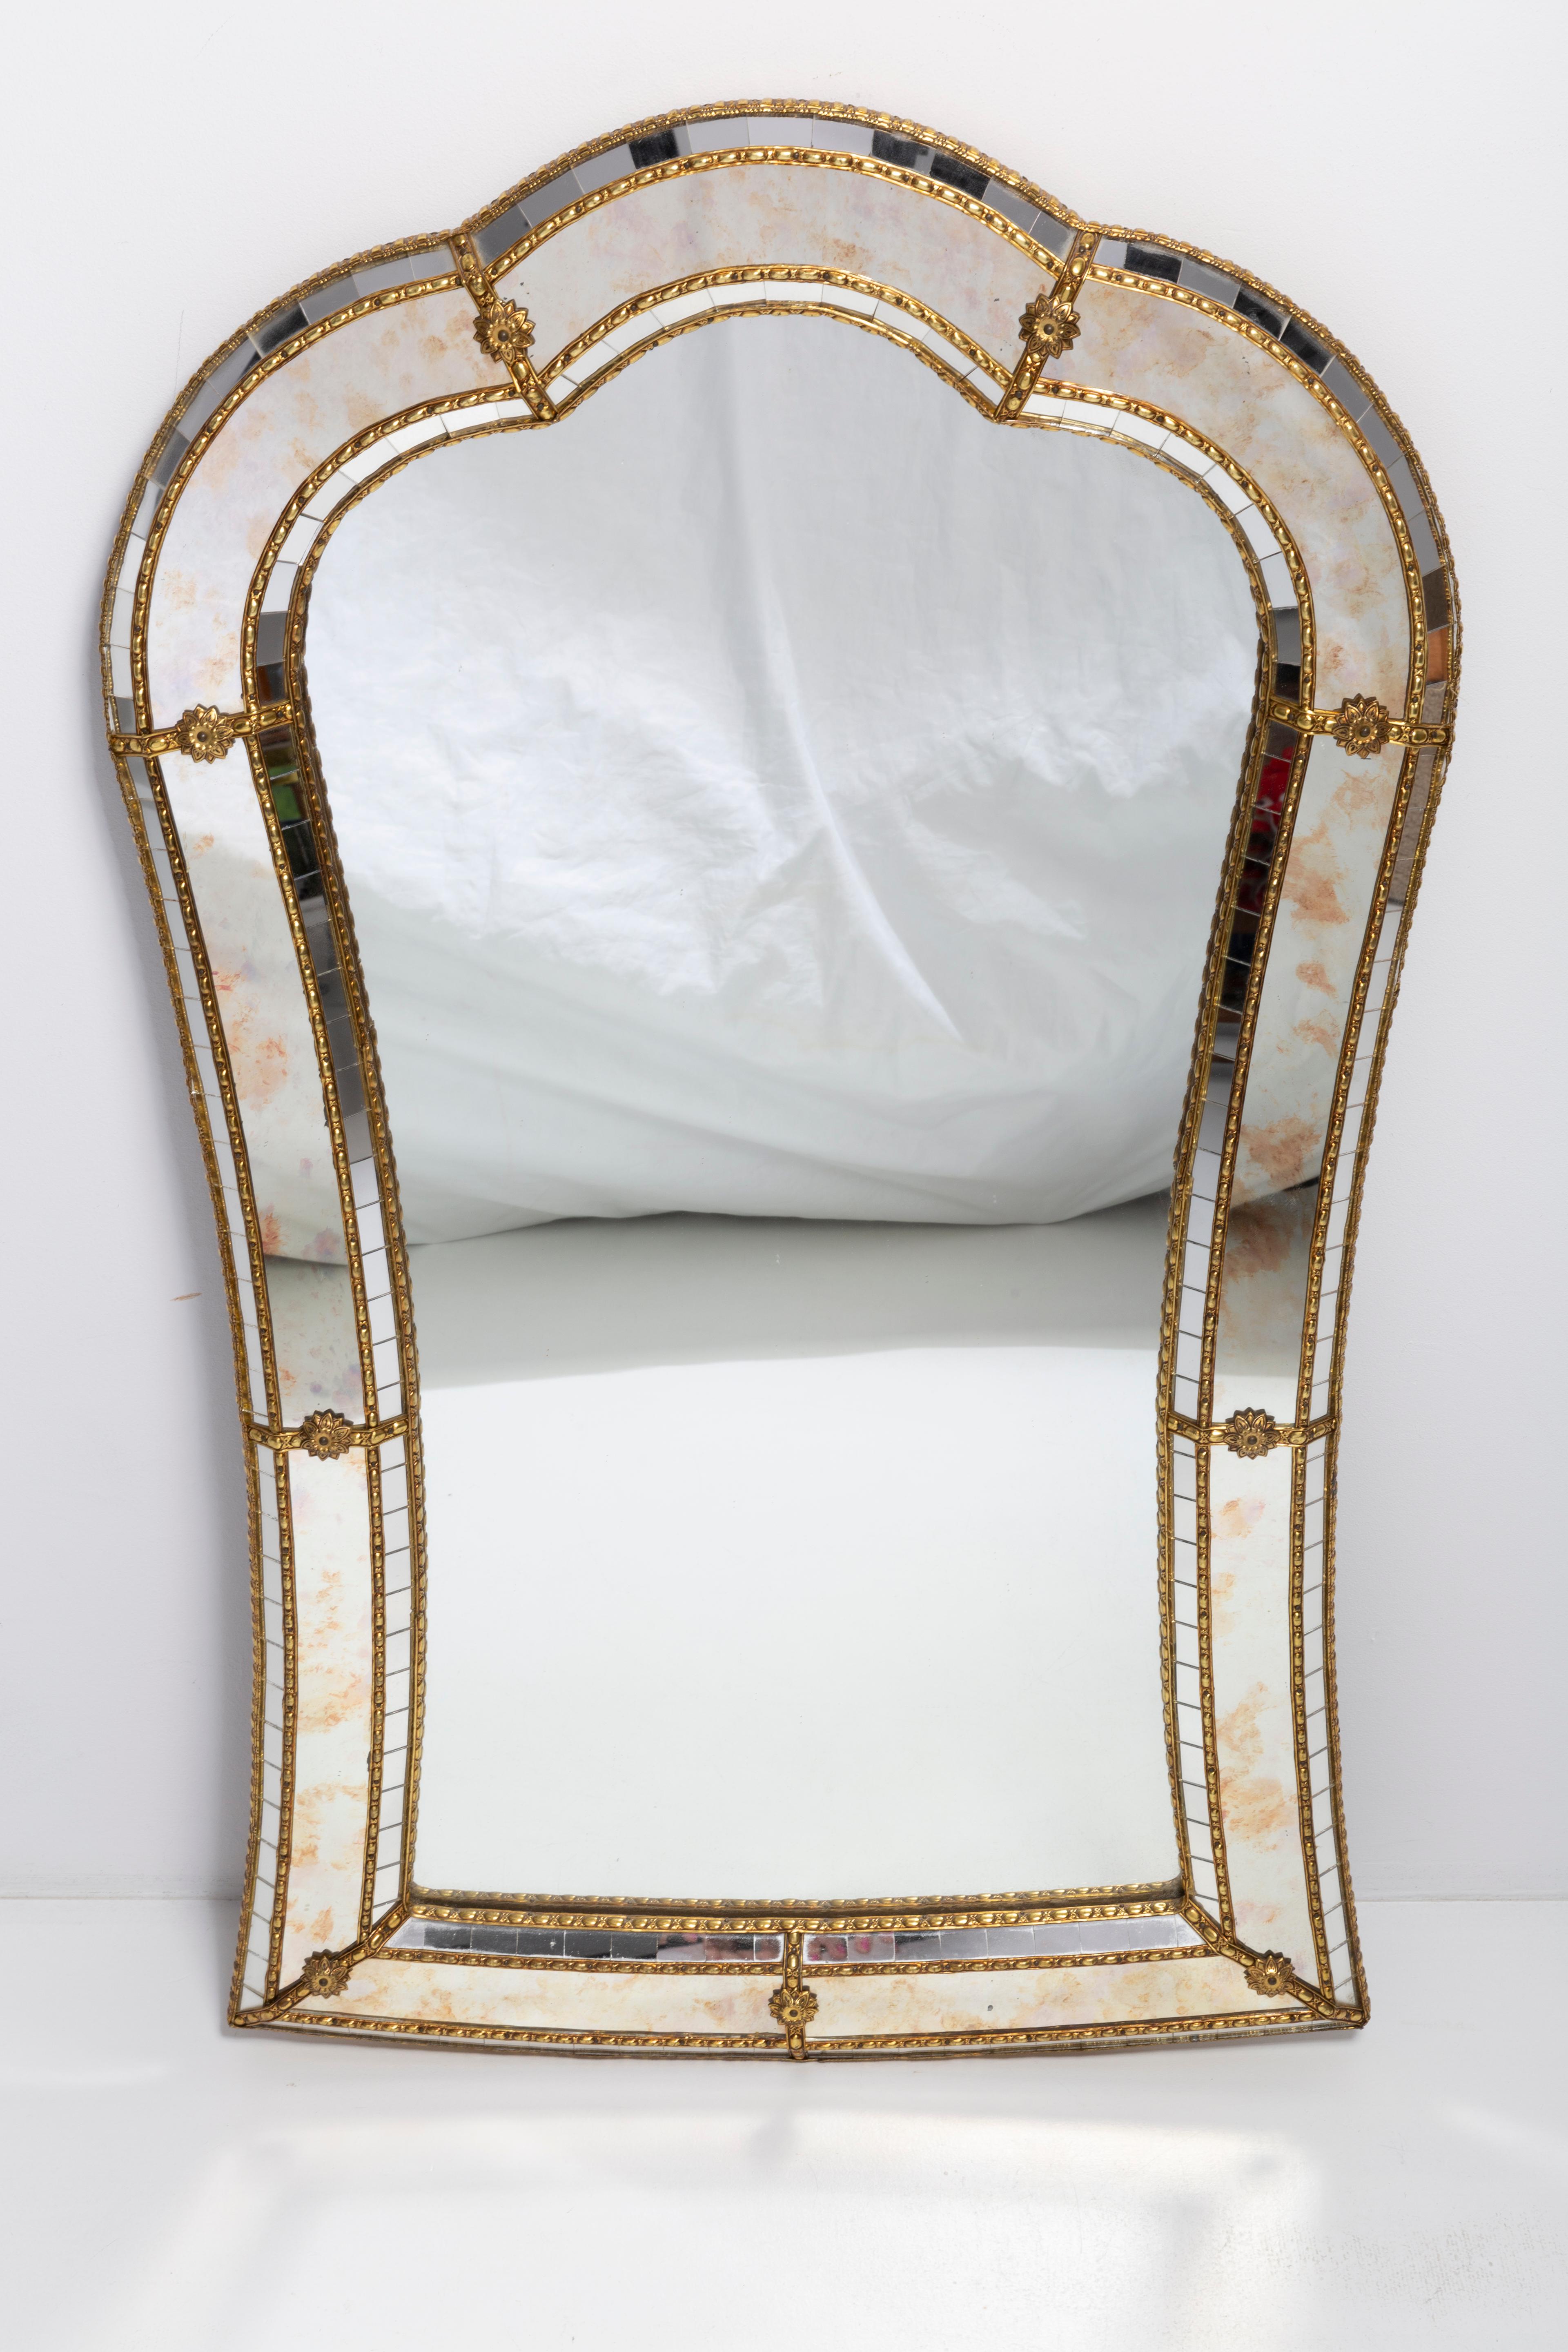 A beautiful medium size mirror in a golden decorative frame from Italy. Looks absolutely fantastic! The frame is made of metal. Mirror is in very good vintage condition, no damage or cracks in the frame. Original glass. Beautiful piece for every